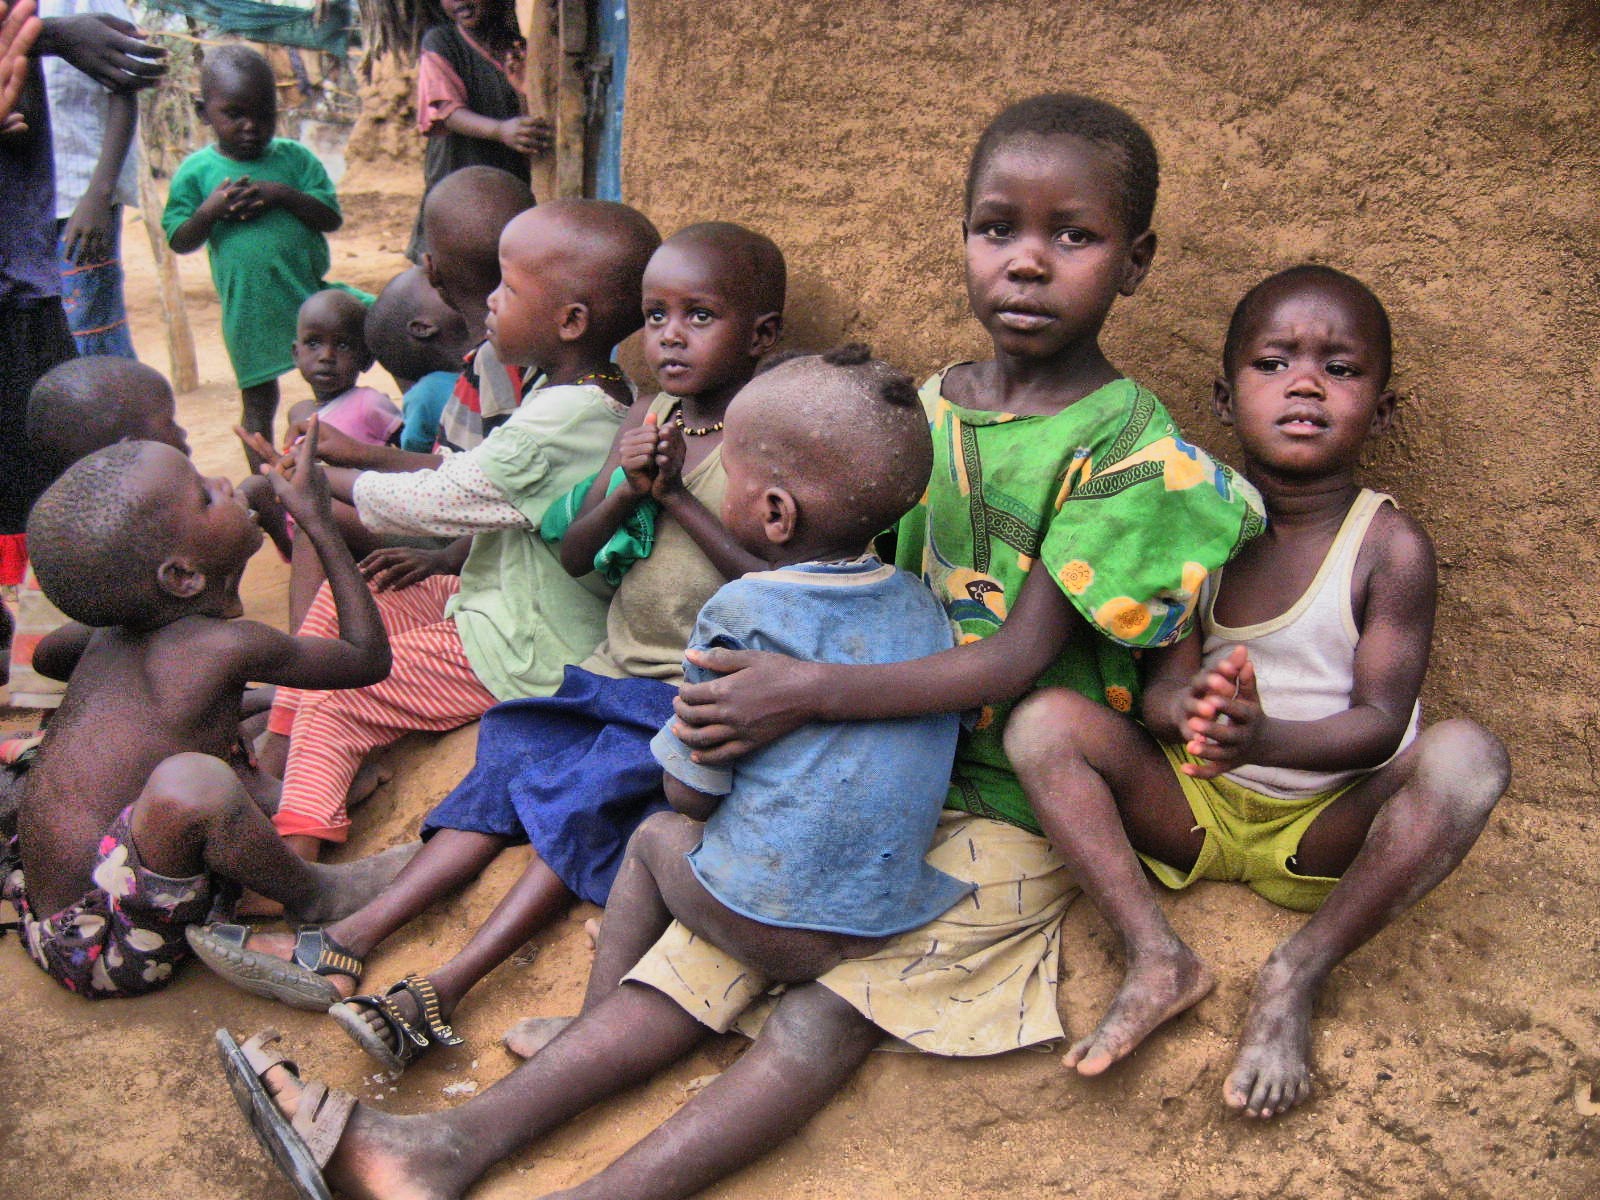 10 Facts About Child Labor In Africa The Borgen Project